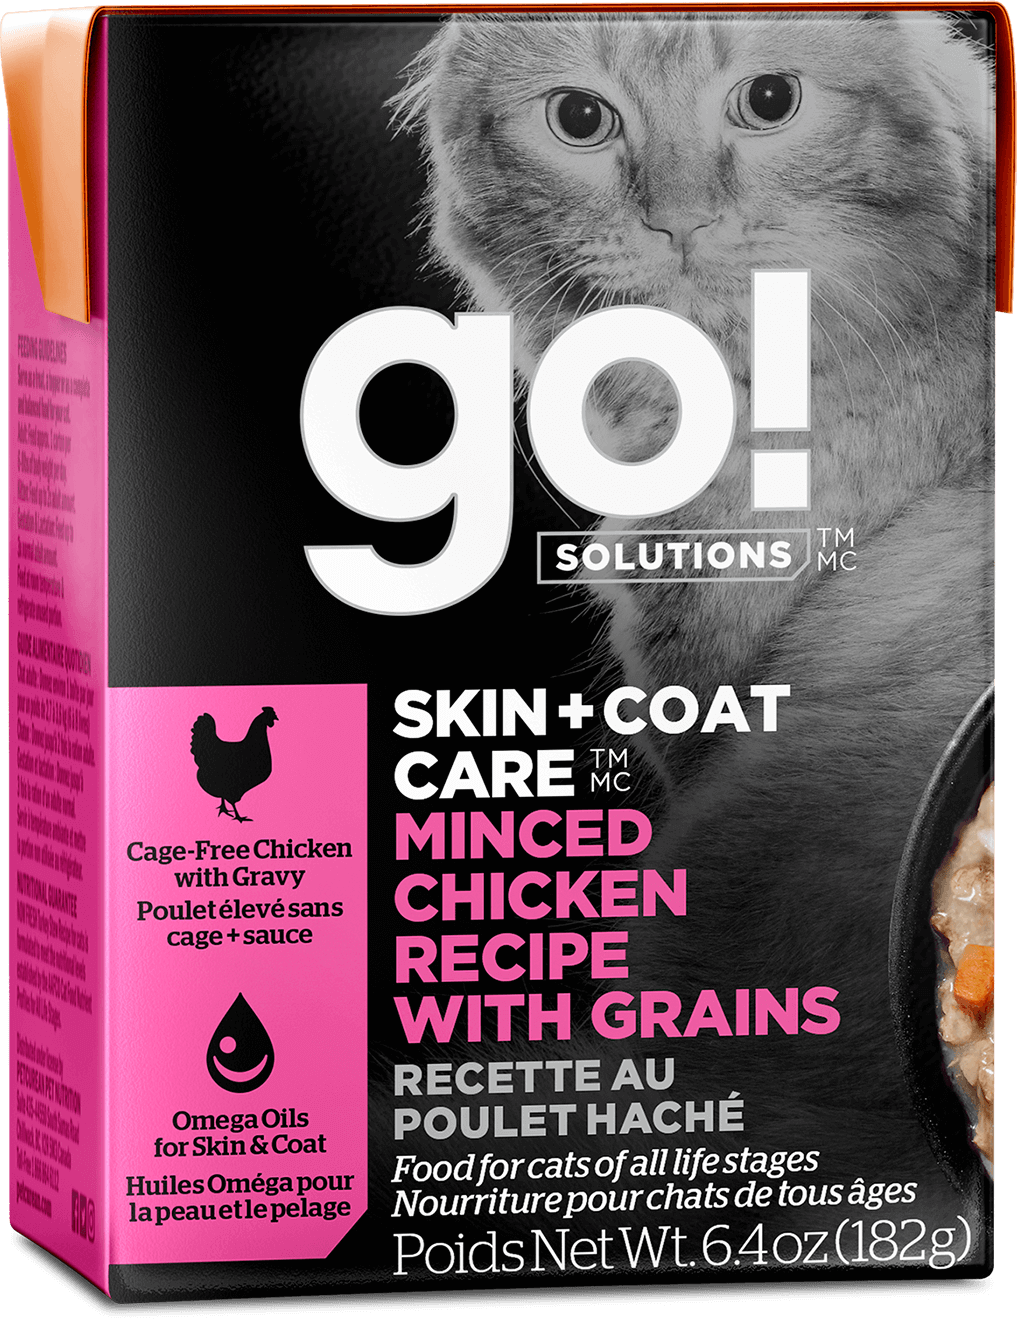 GO! Solutions Skin + Coat Care Minced Chicken Recipe With Grains